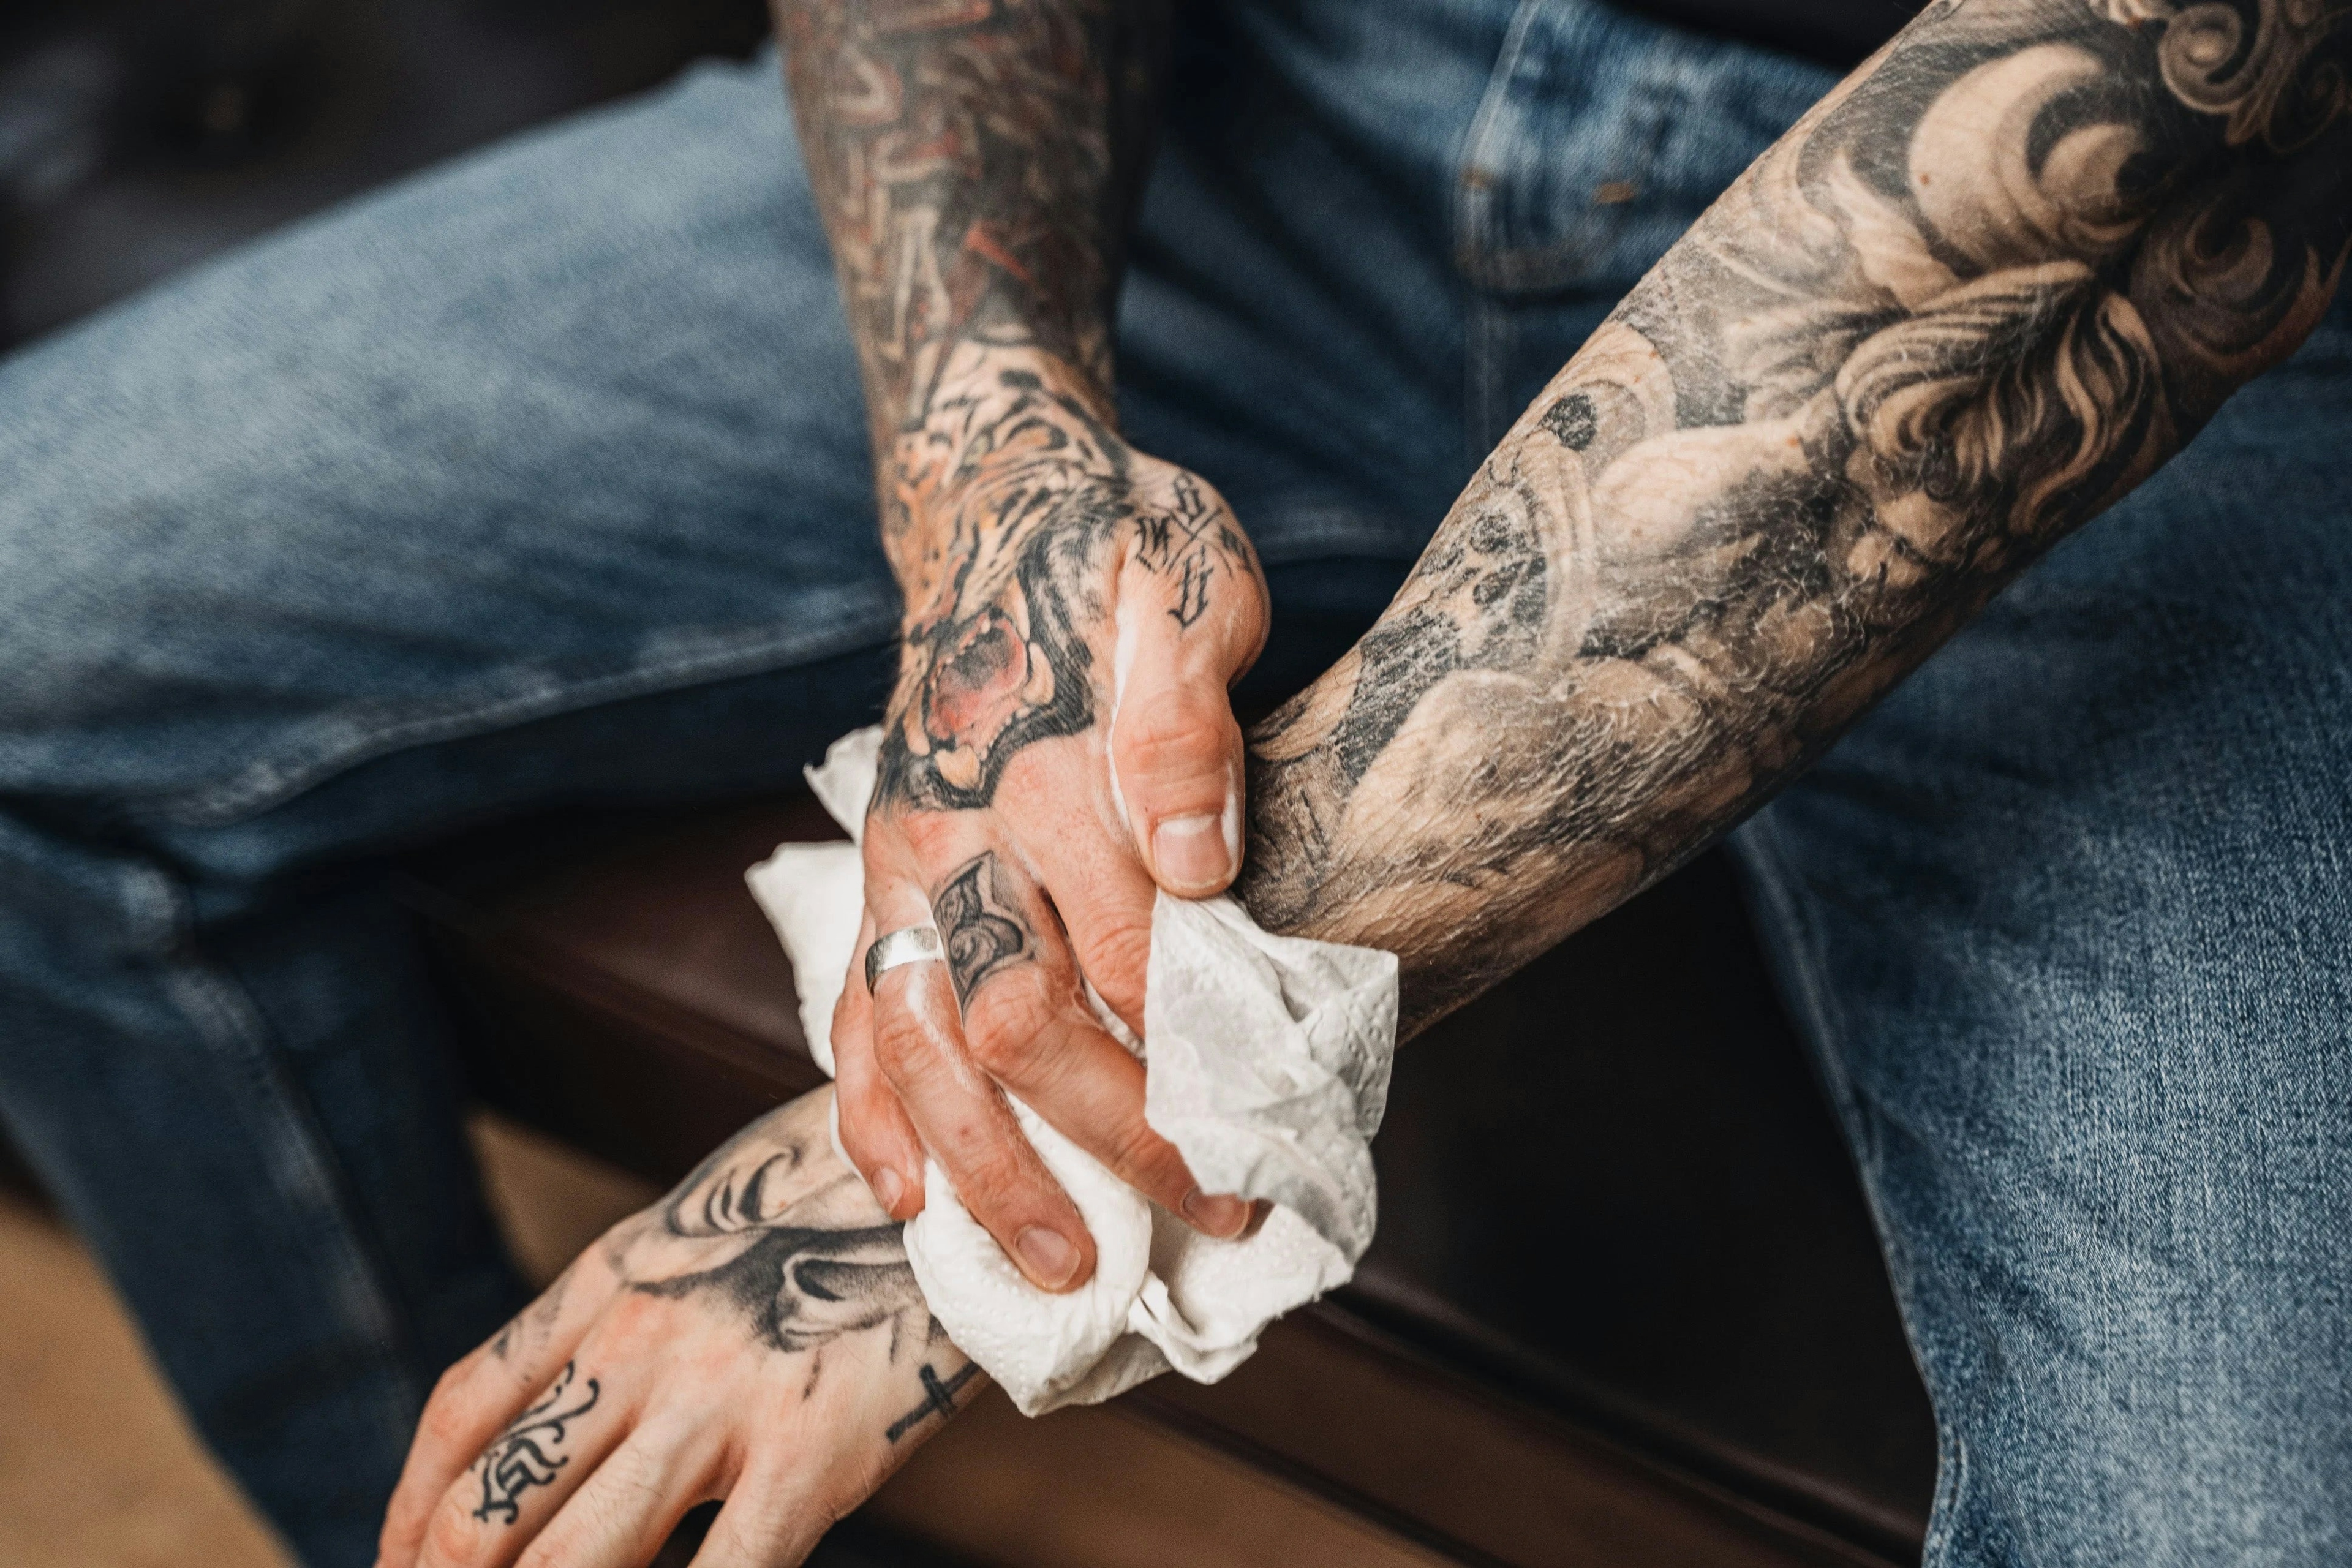 How to clean a tattoo